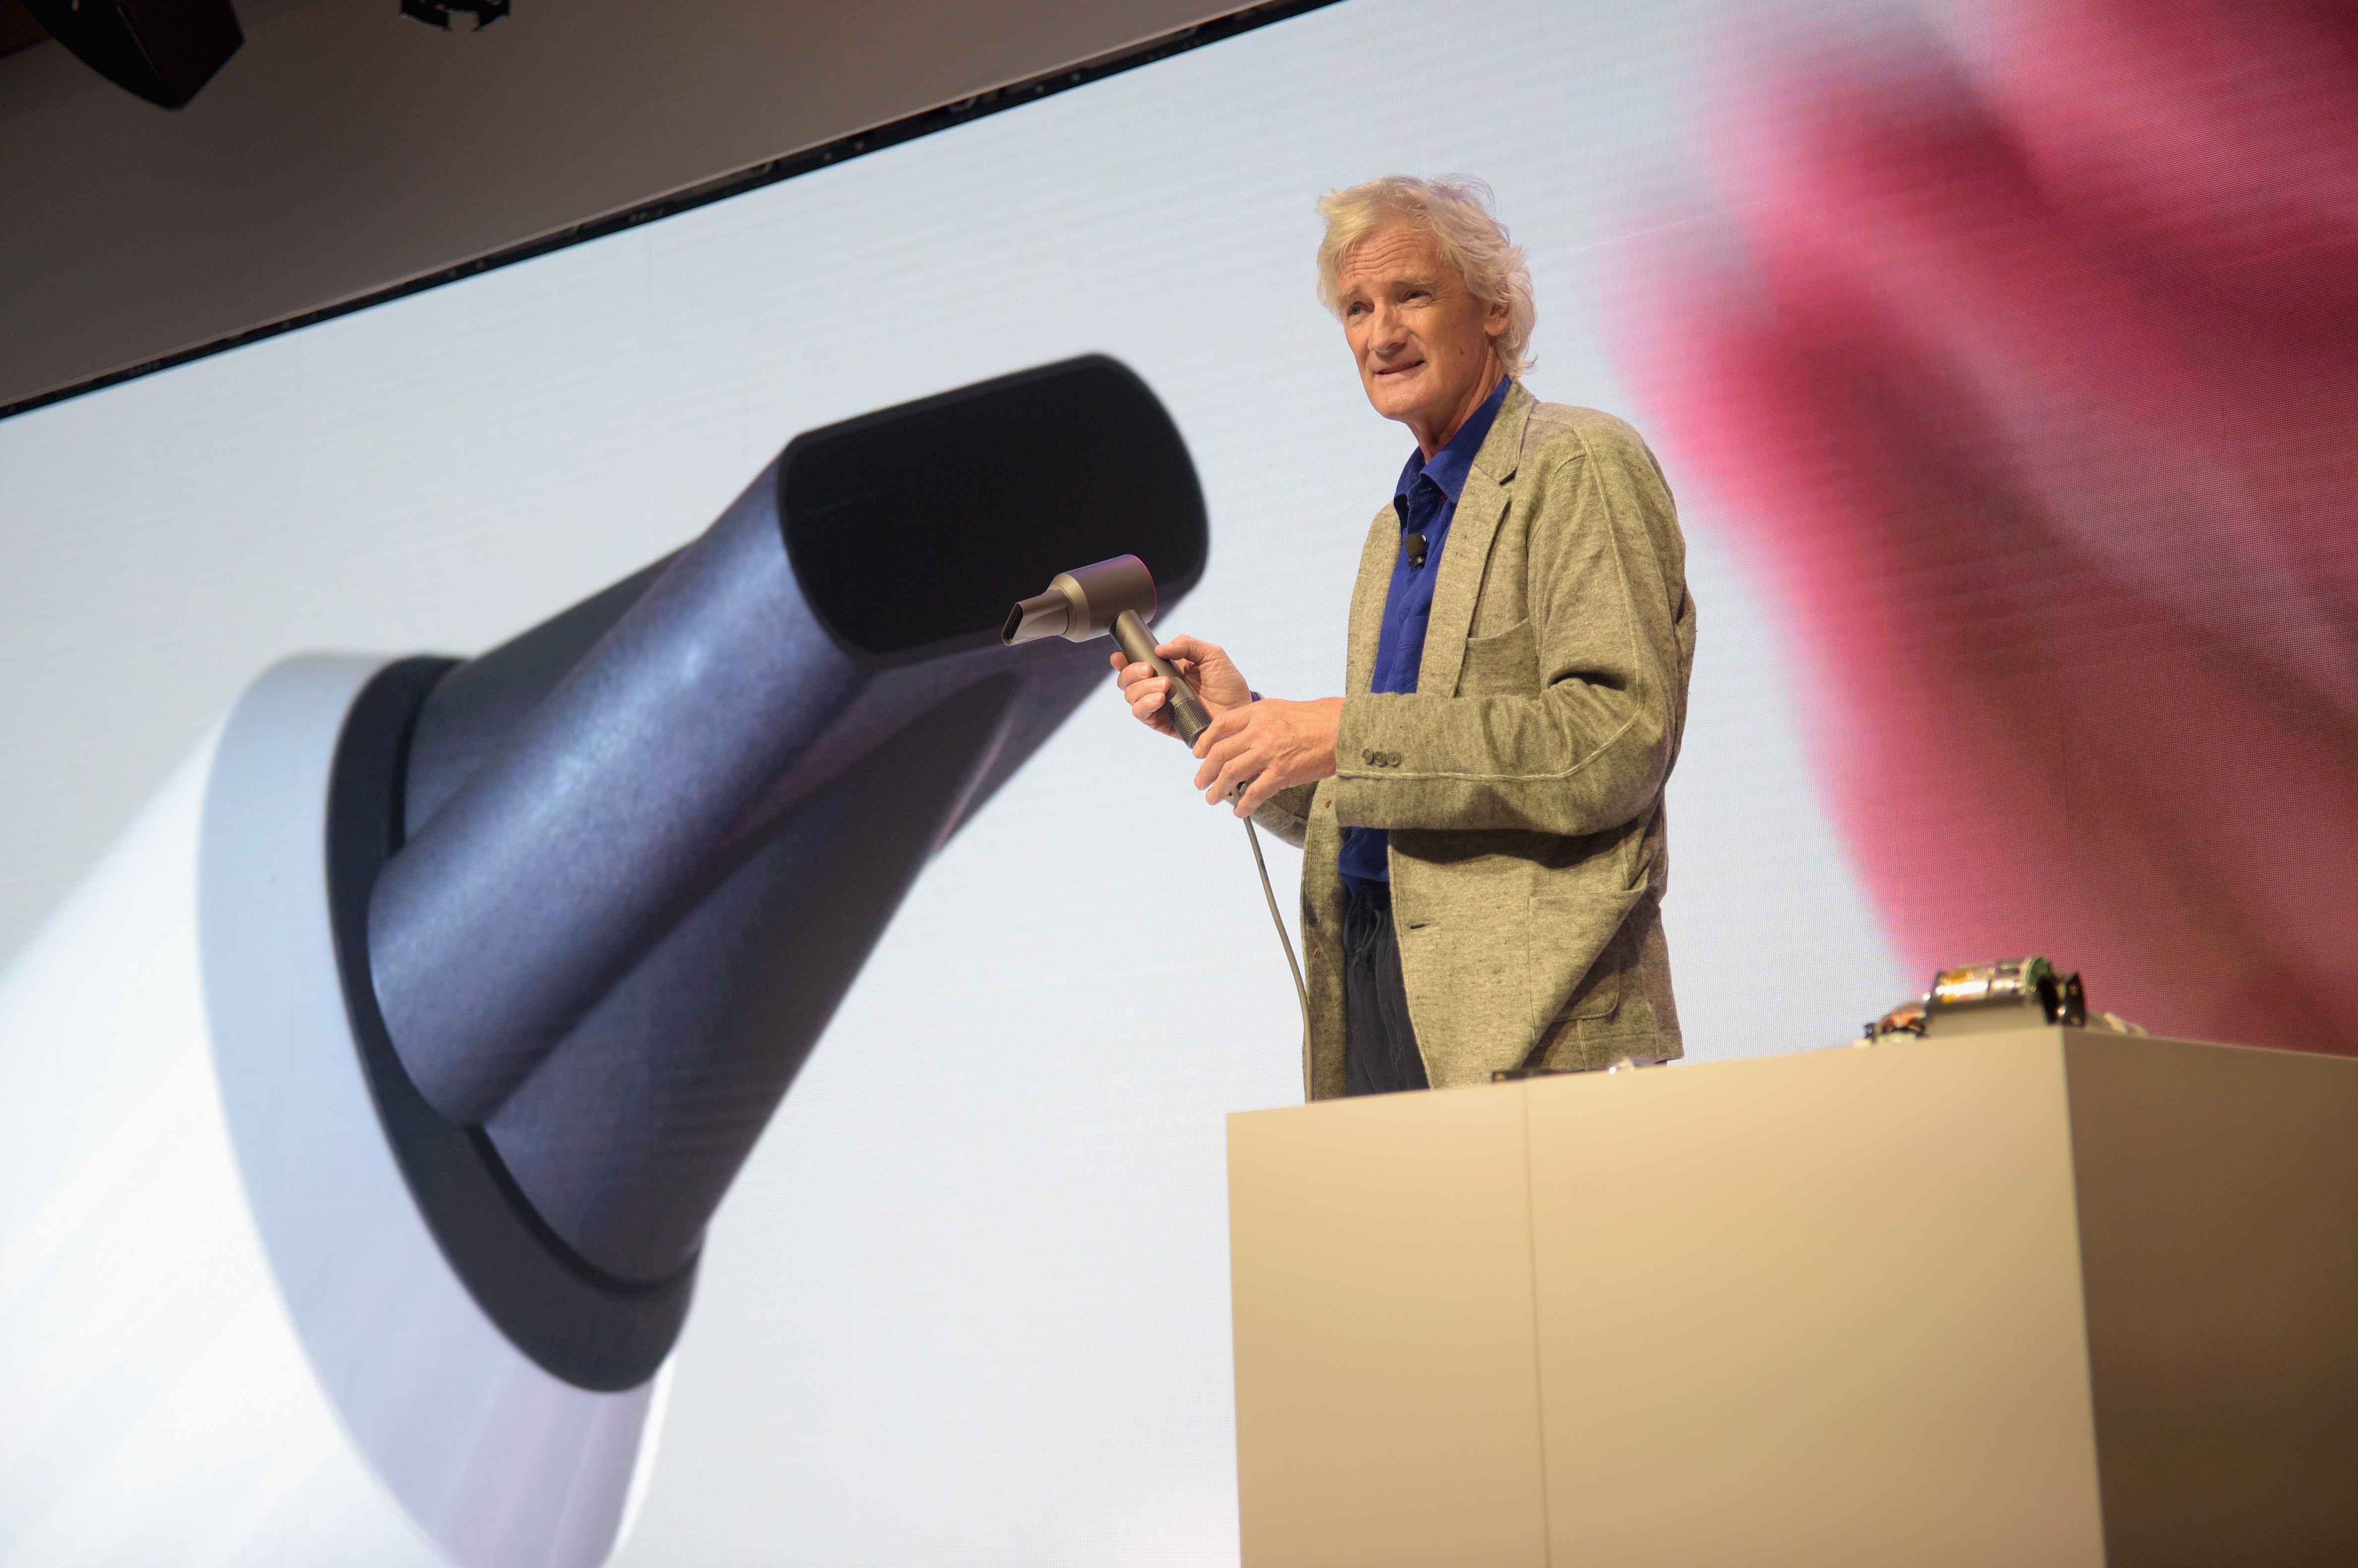 Dyson launches his Supersonic Hair Dryer. Photo: AFP